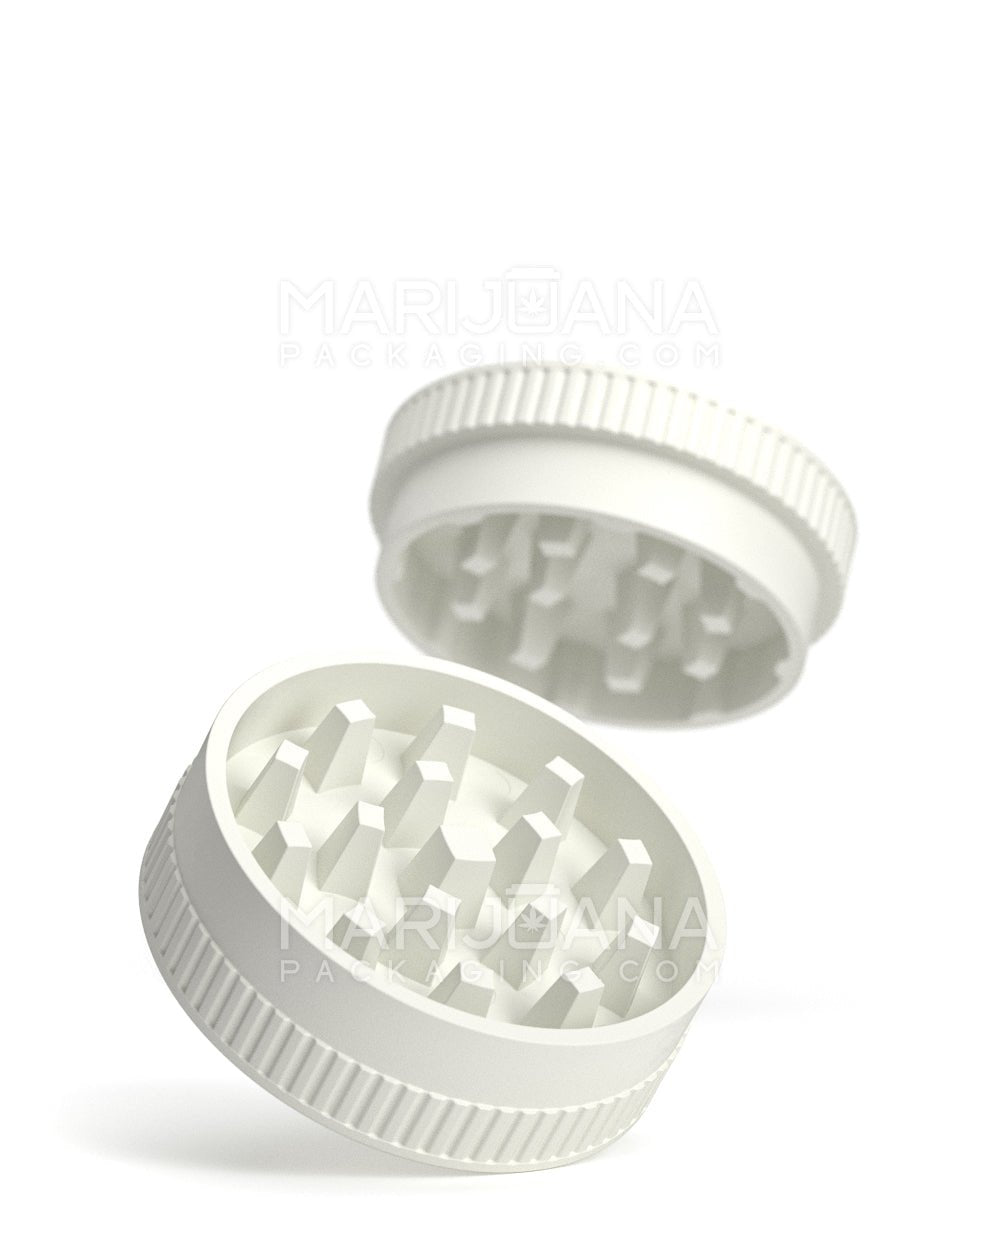 Biodegradable Thick Wall White Grinder | 2 Piece - 55mm - 12 Count - 8